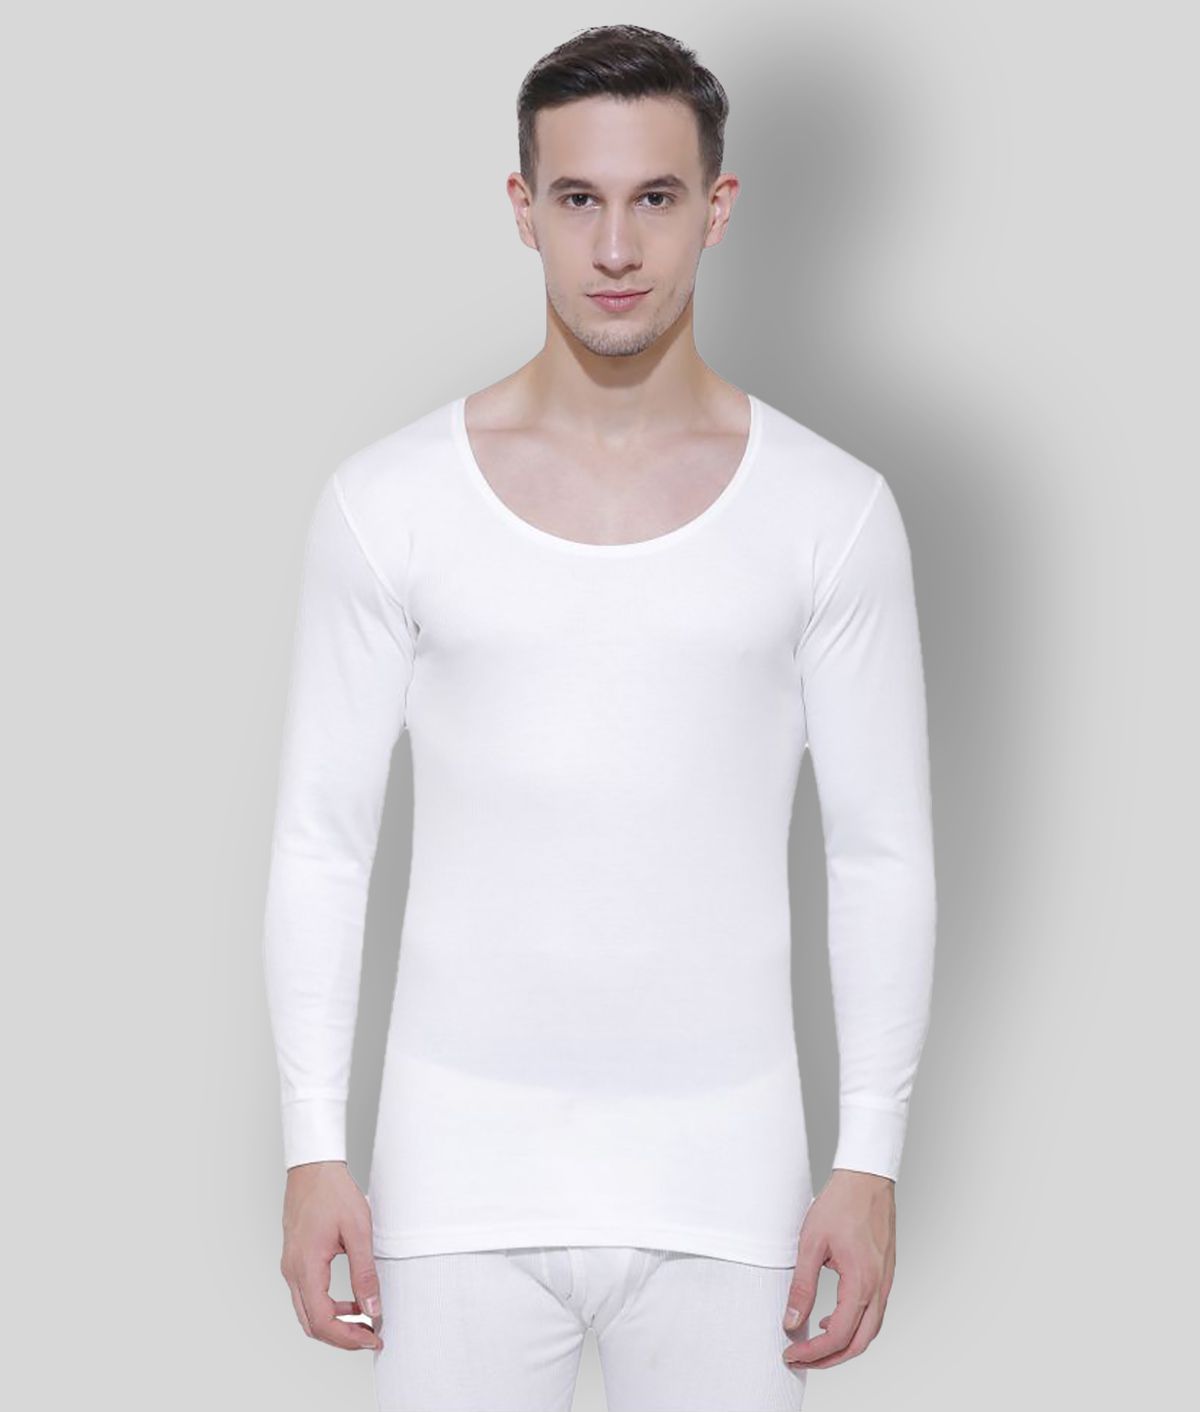     			Bodycare Insider - Off-White Cotton Blend Men's Thermal Tops ( Pack of 1 )